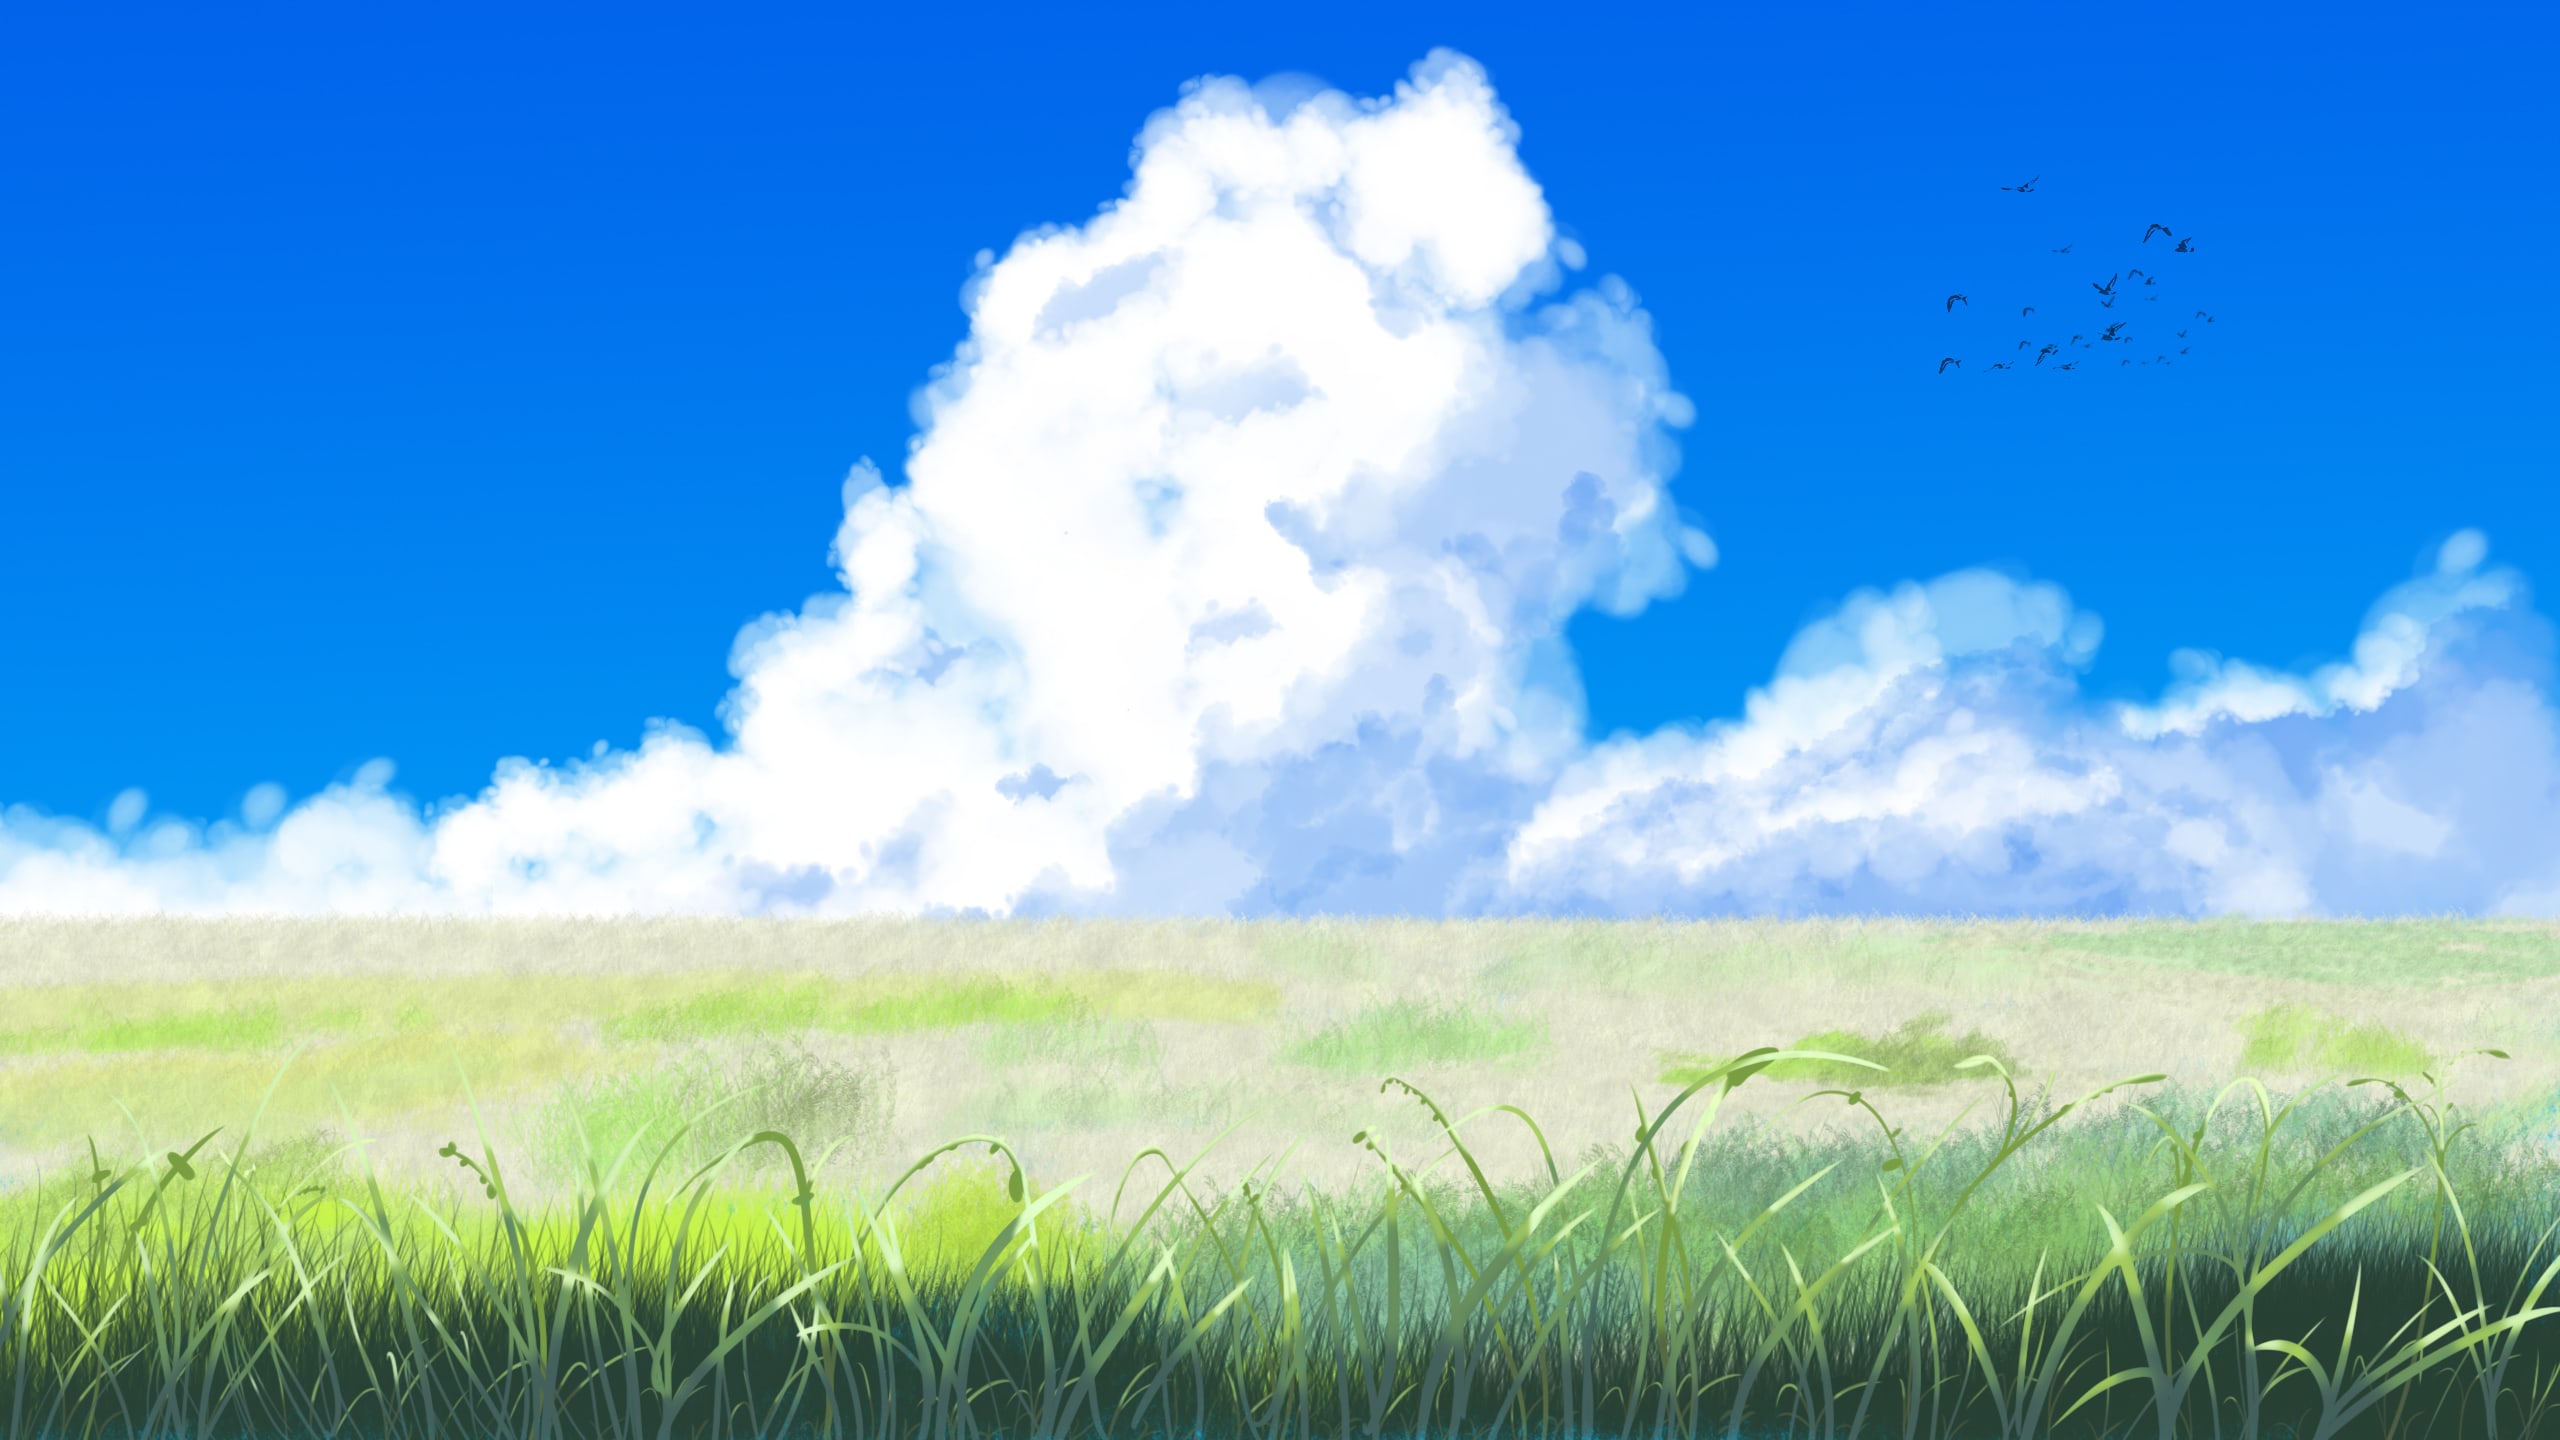 250+ Anime Landscape HD Wallpapers and Backgrounds